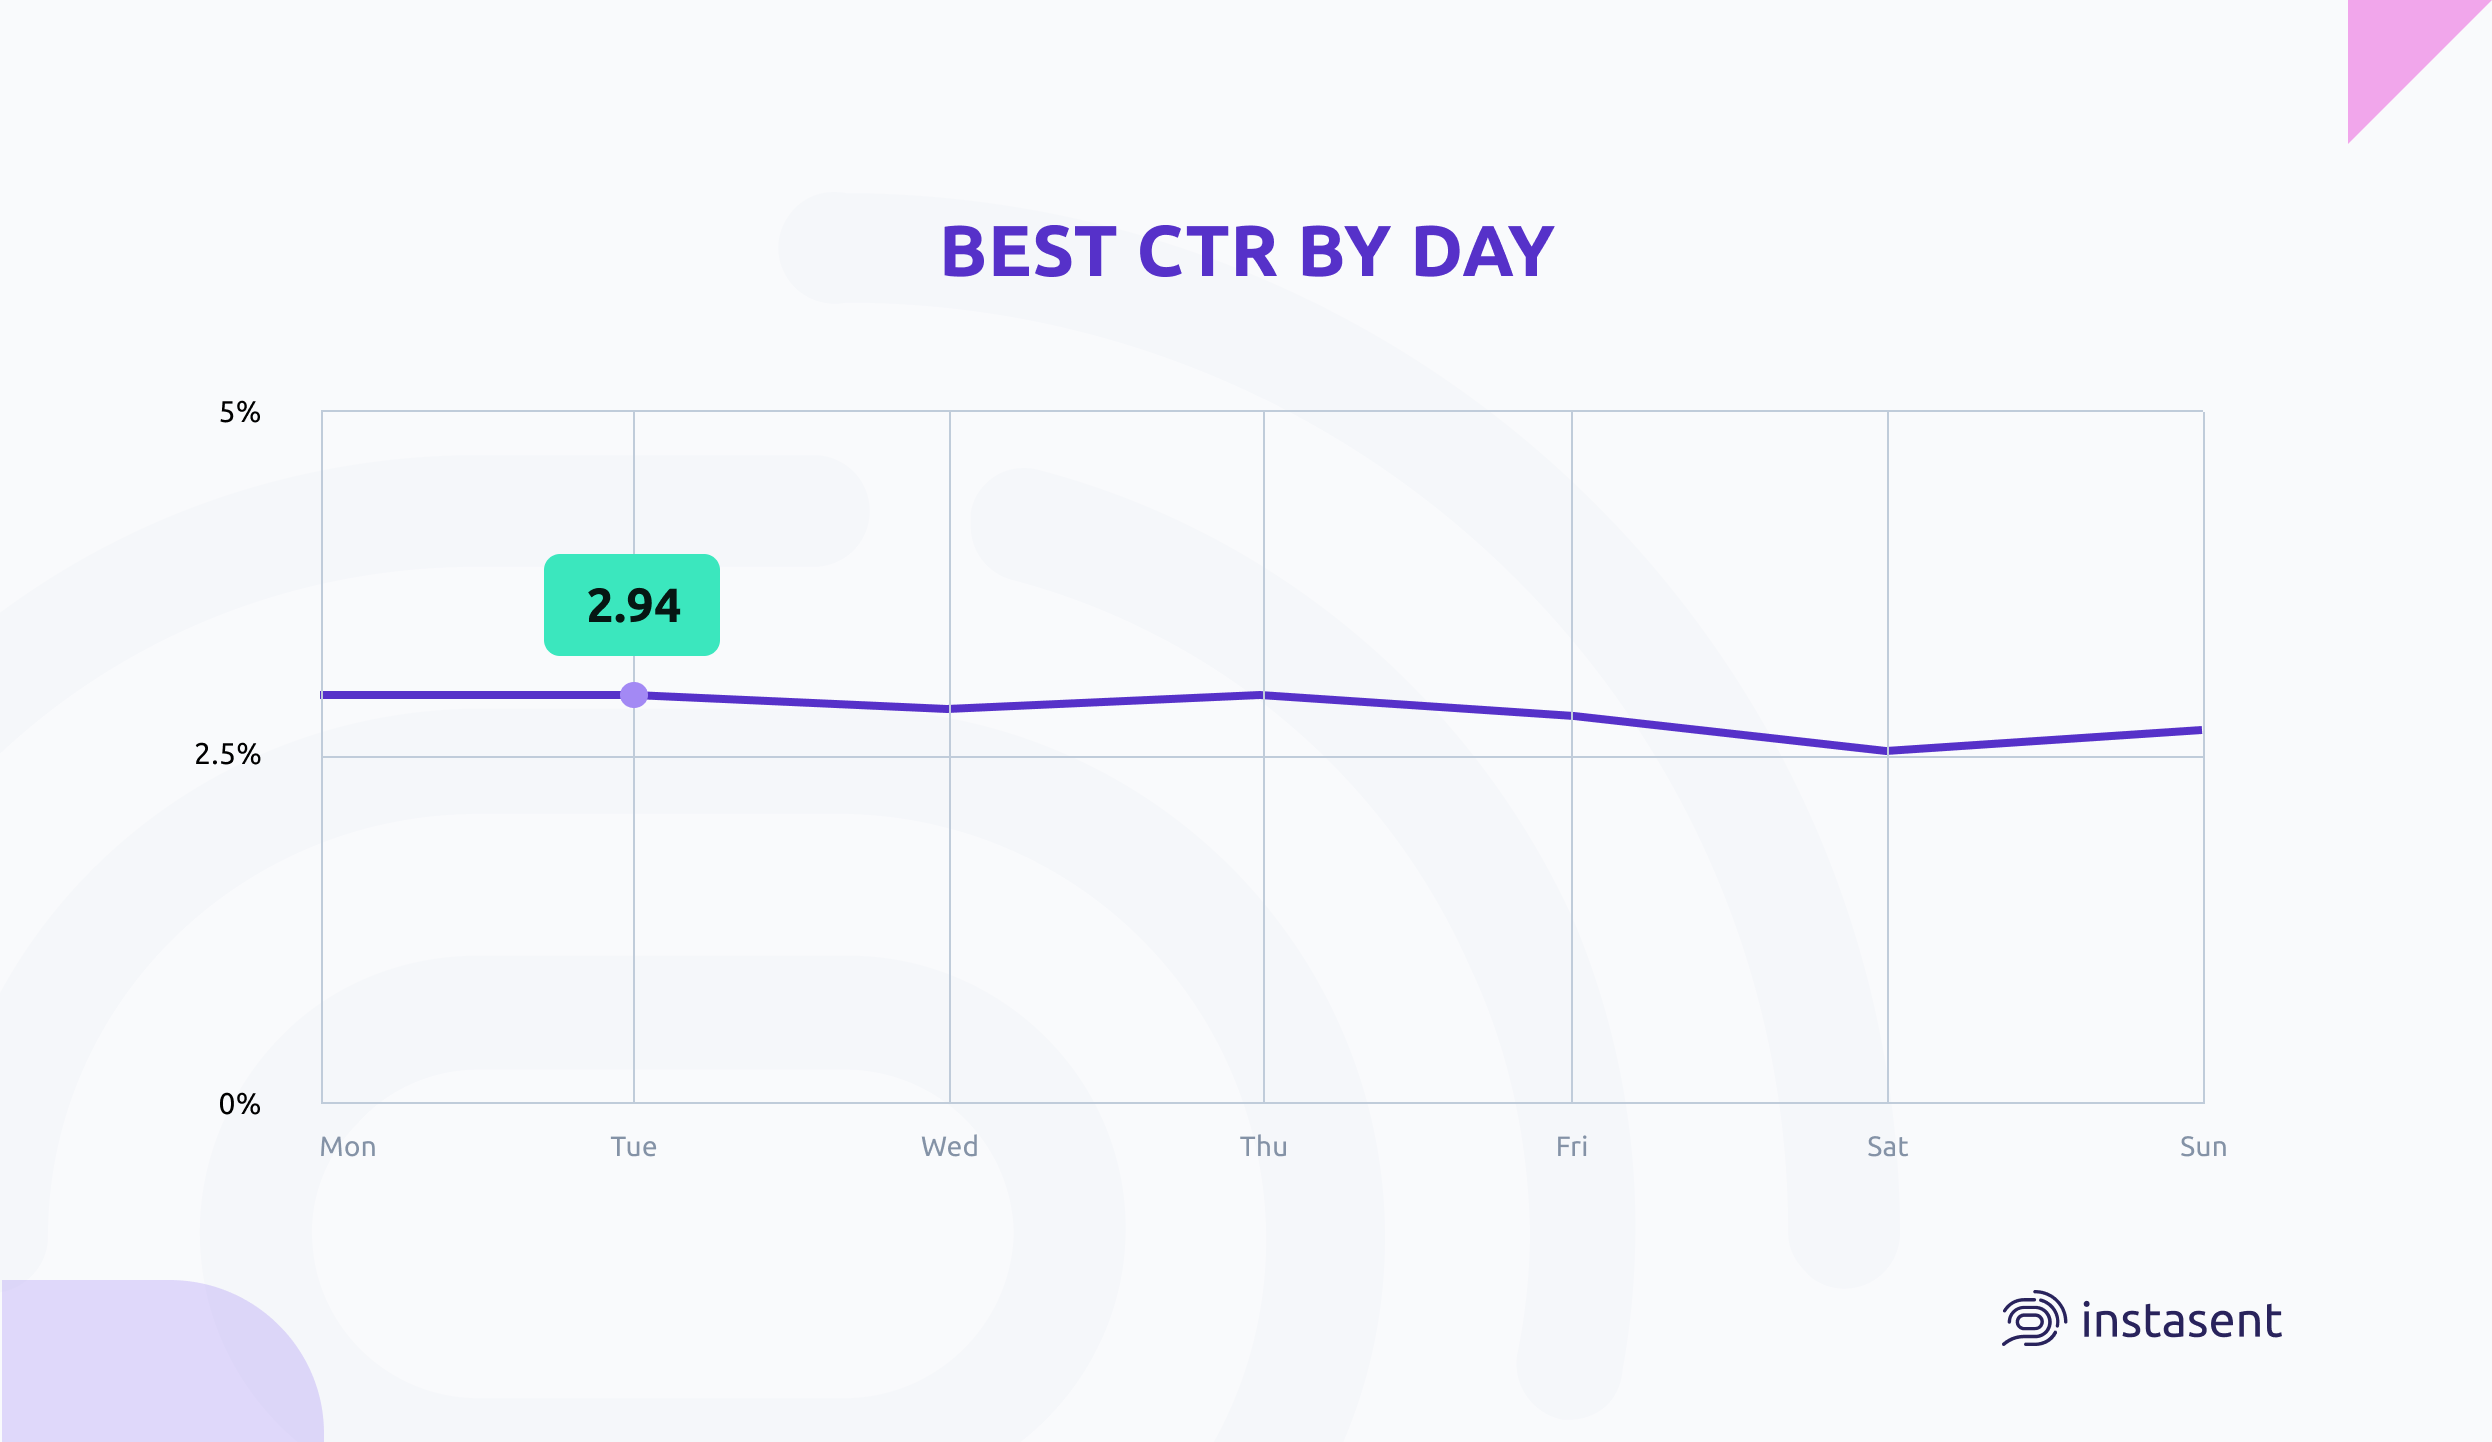 Best Click-Through Rate by day